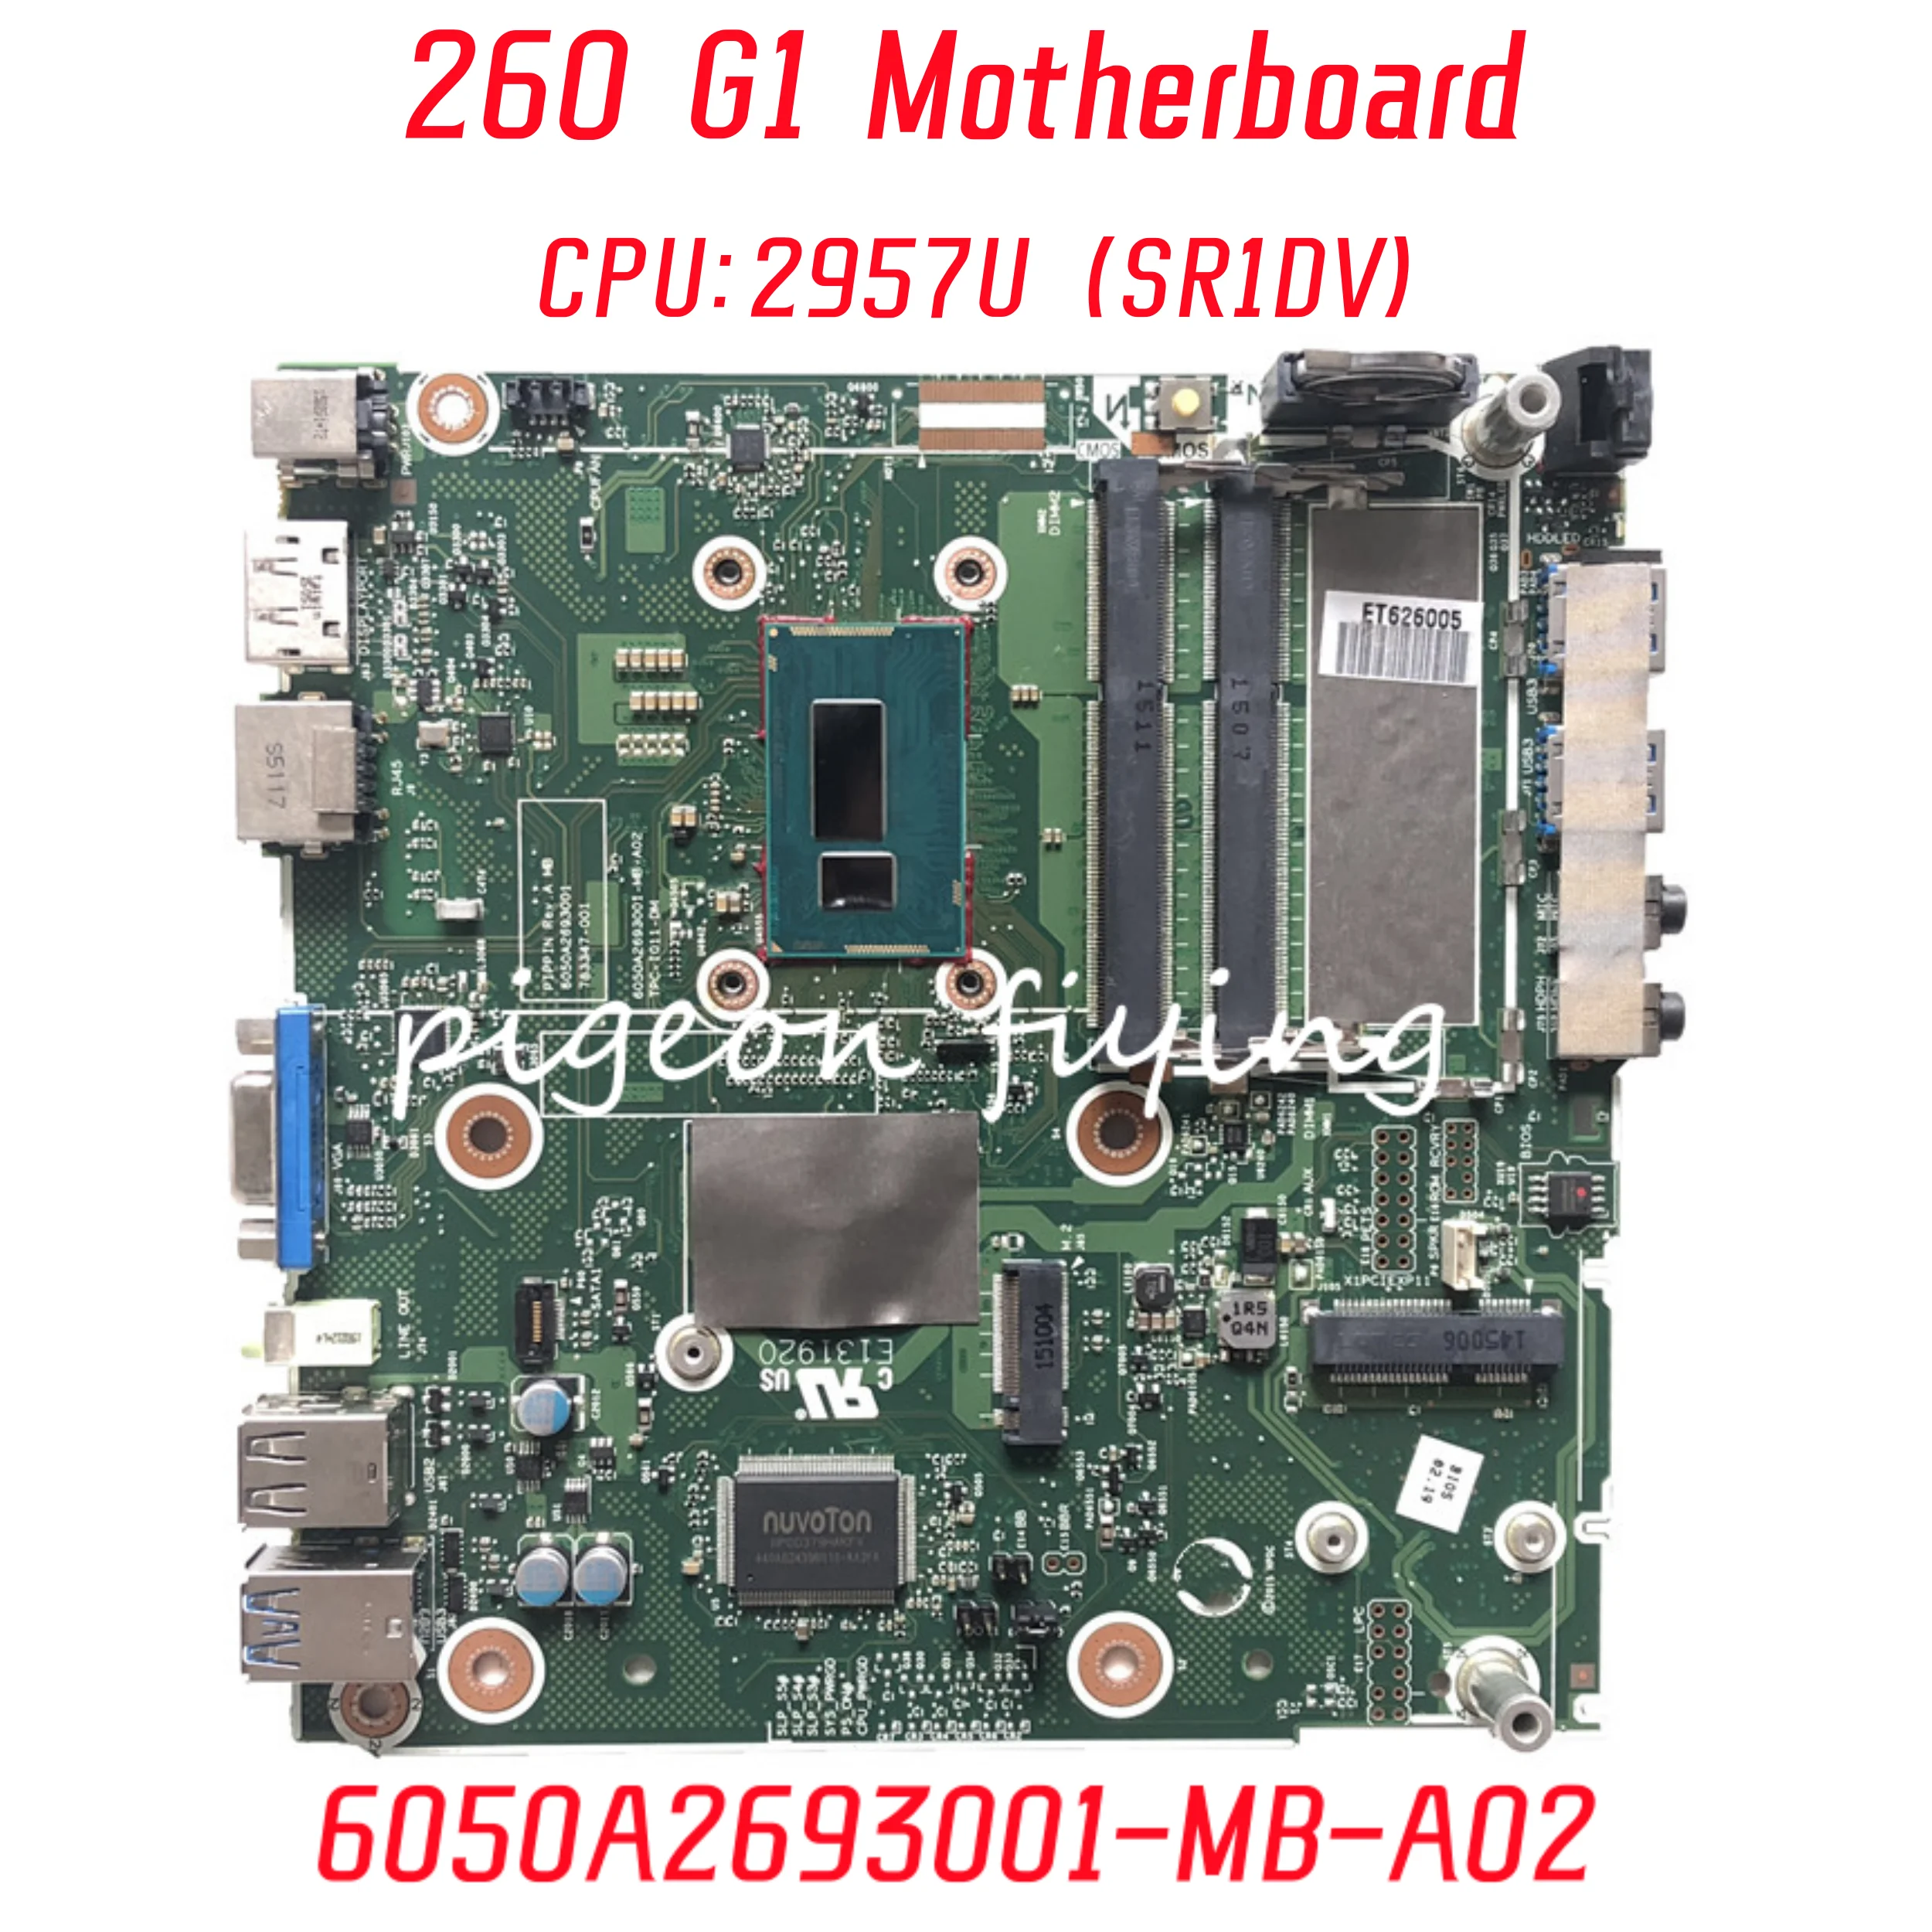 

6050A2693001-MB-A02 Mainboard For HP 260 G1 Laptop Motherboard CPU: 2957U SR1DV 783347-001 791401-003 100% Fully Test